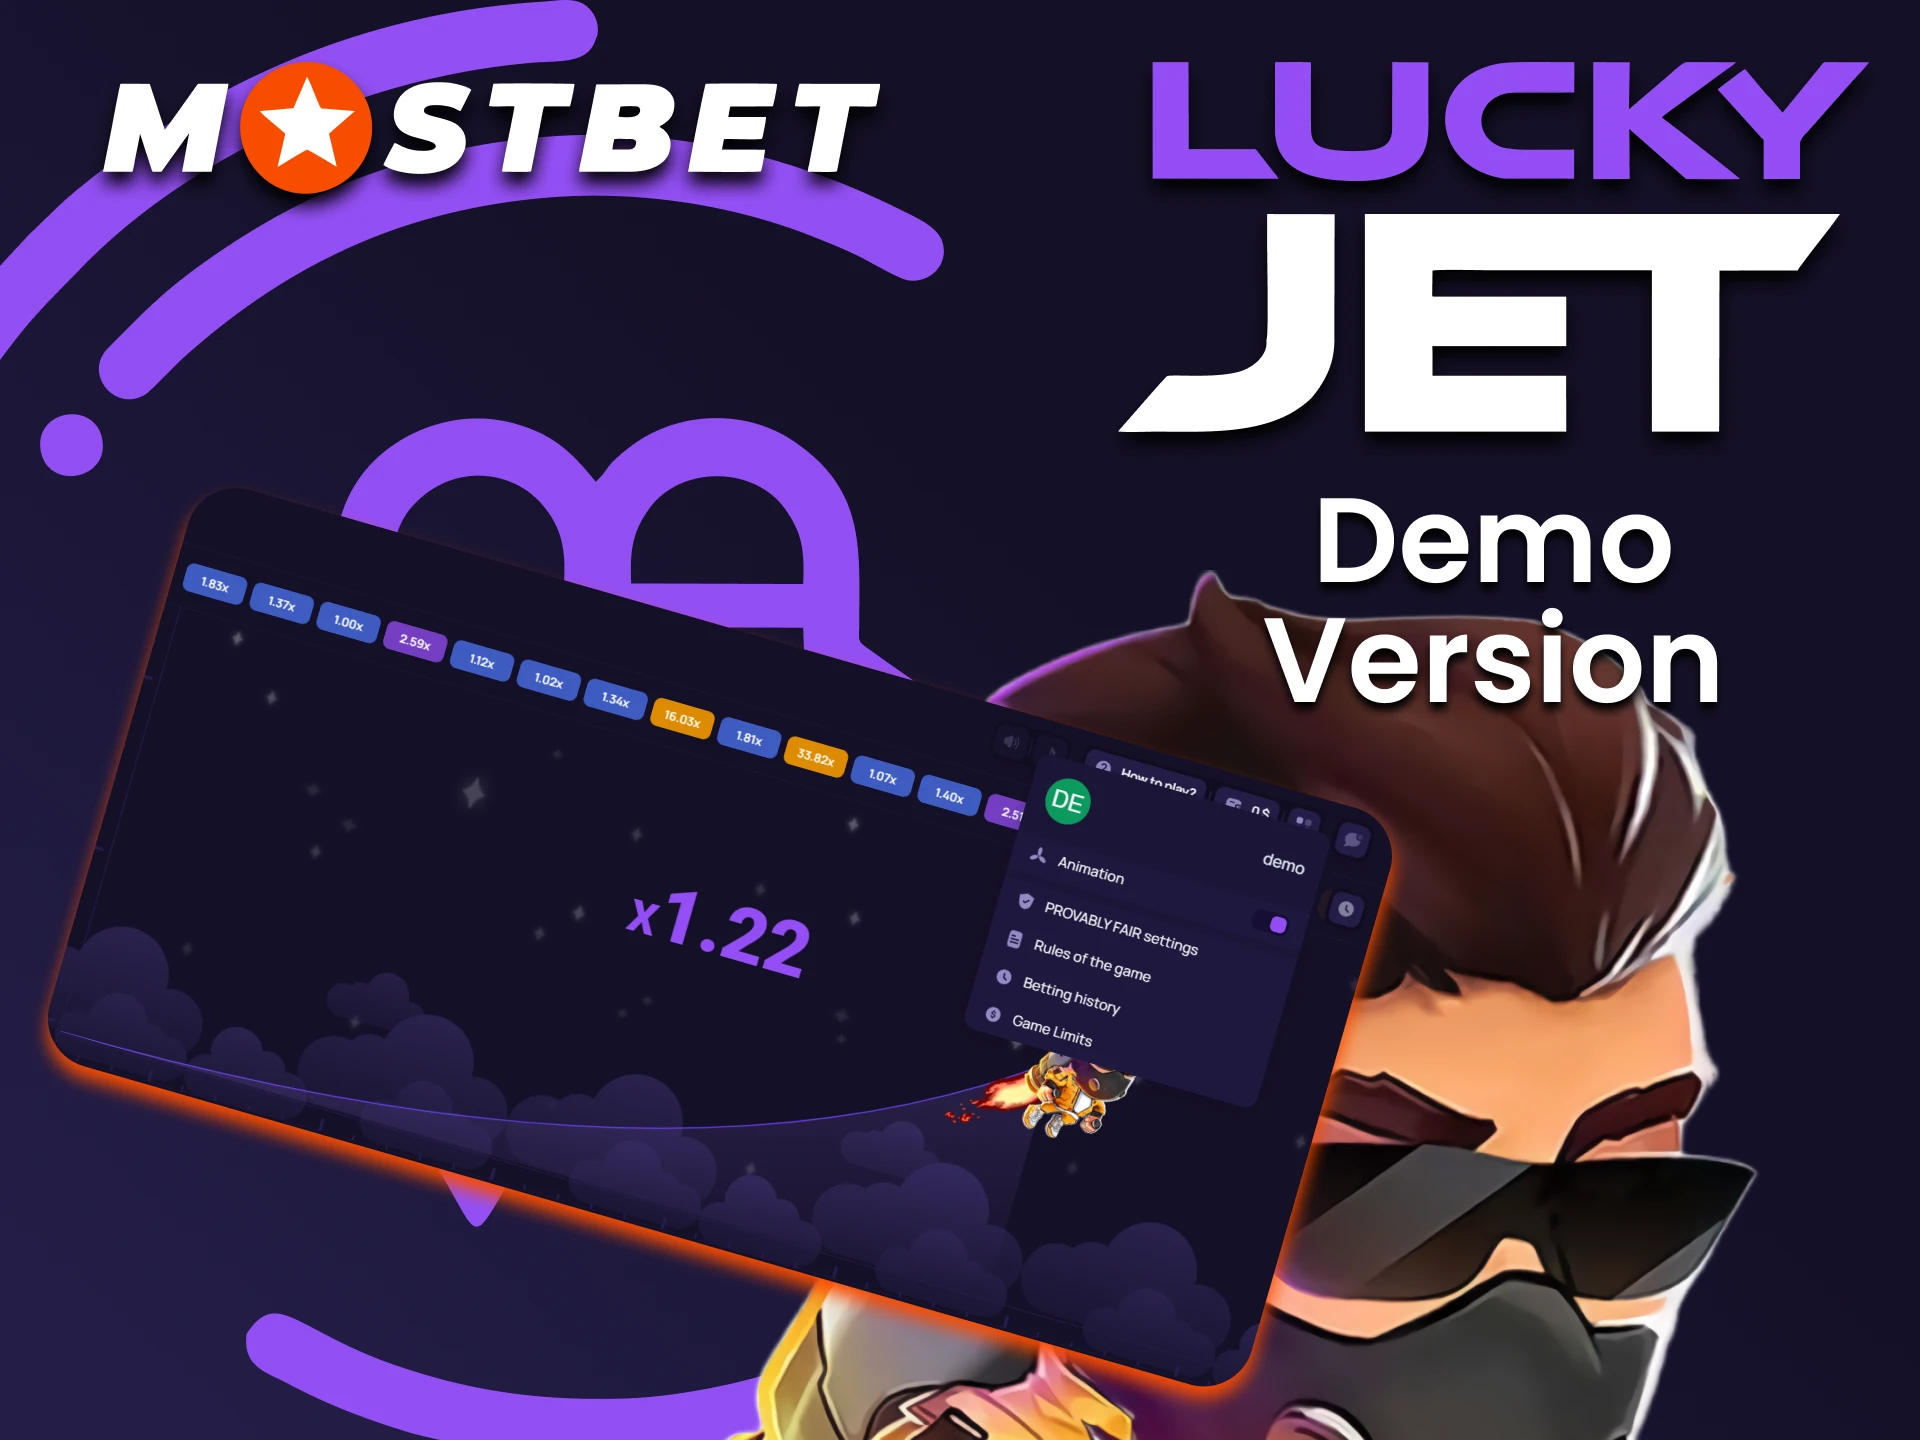 Learn the game in the demo version of Lucky Jet at Mostbet.